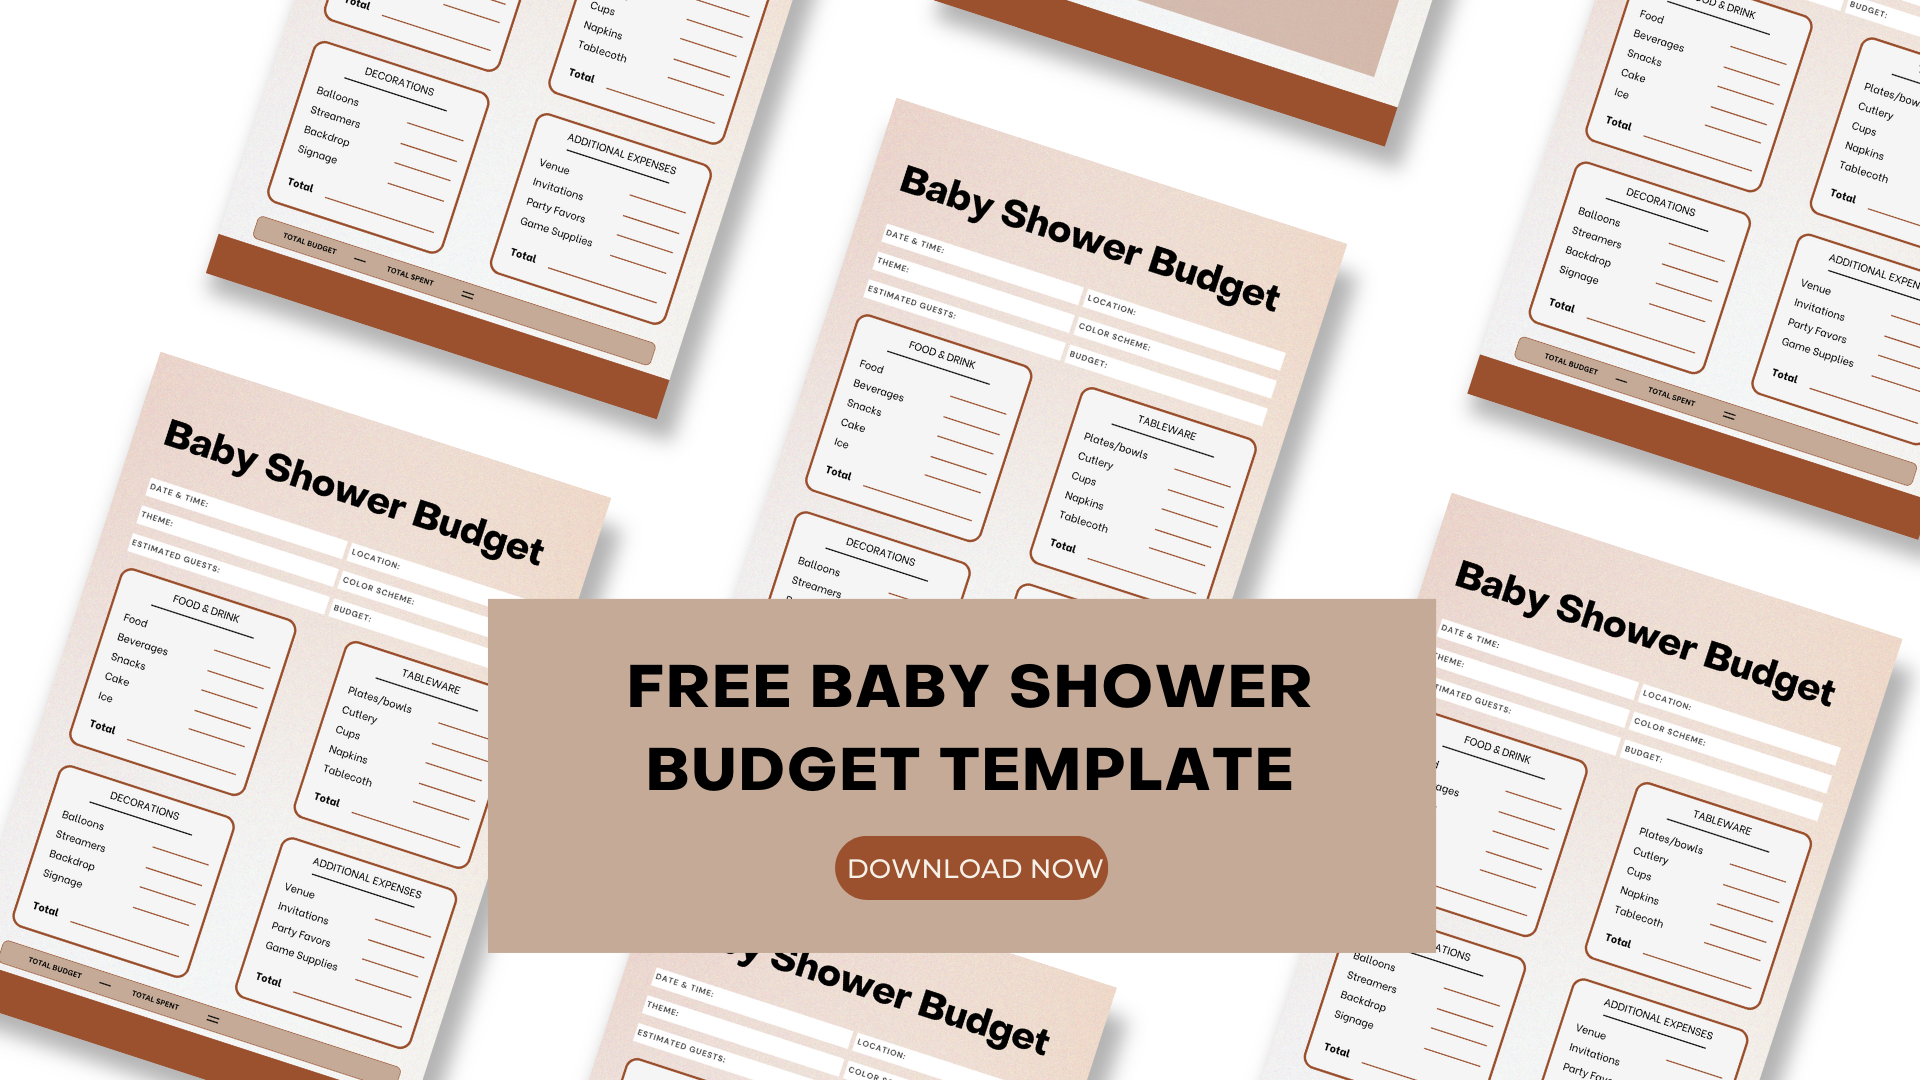 download free baby shower budget template